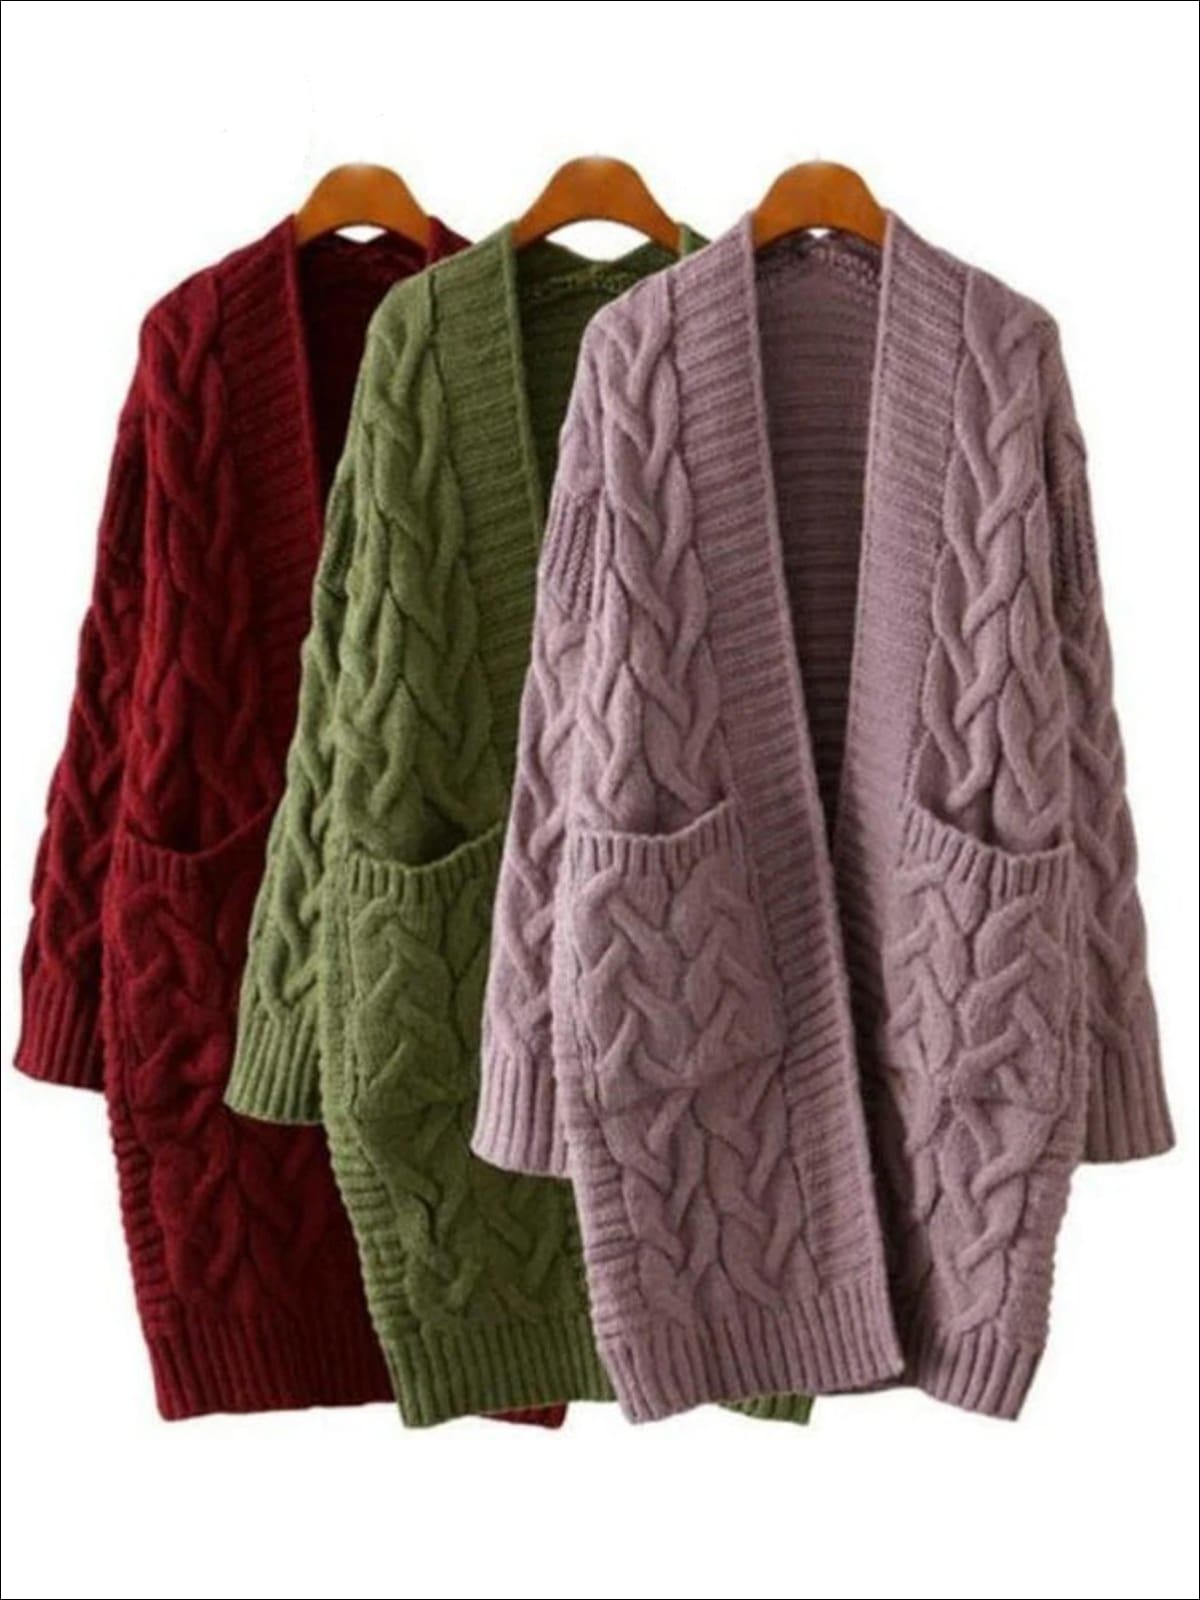 Women's Over-Sized Cable Knit Fall Cardigan with Side Pockets